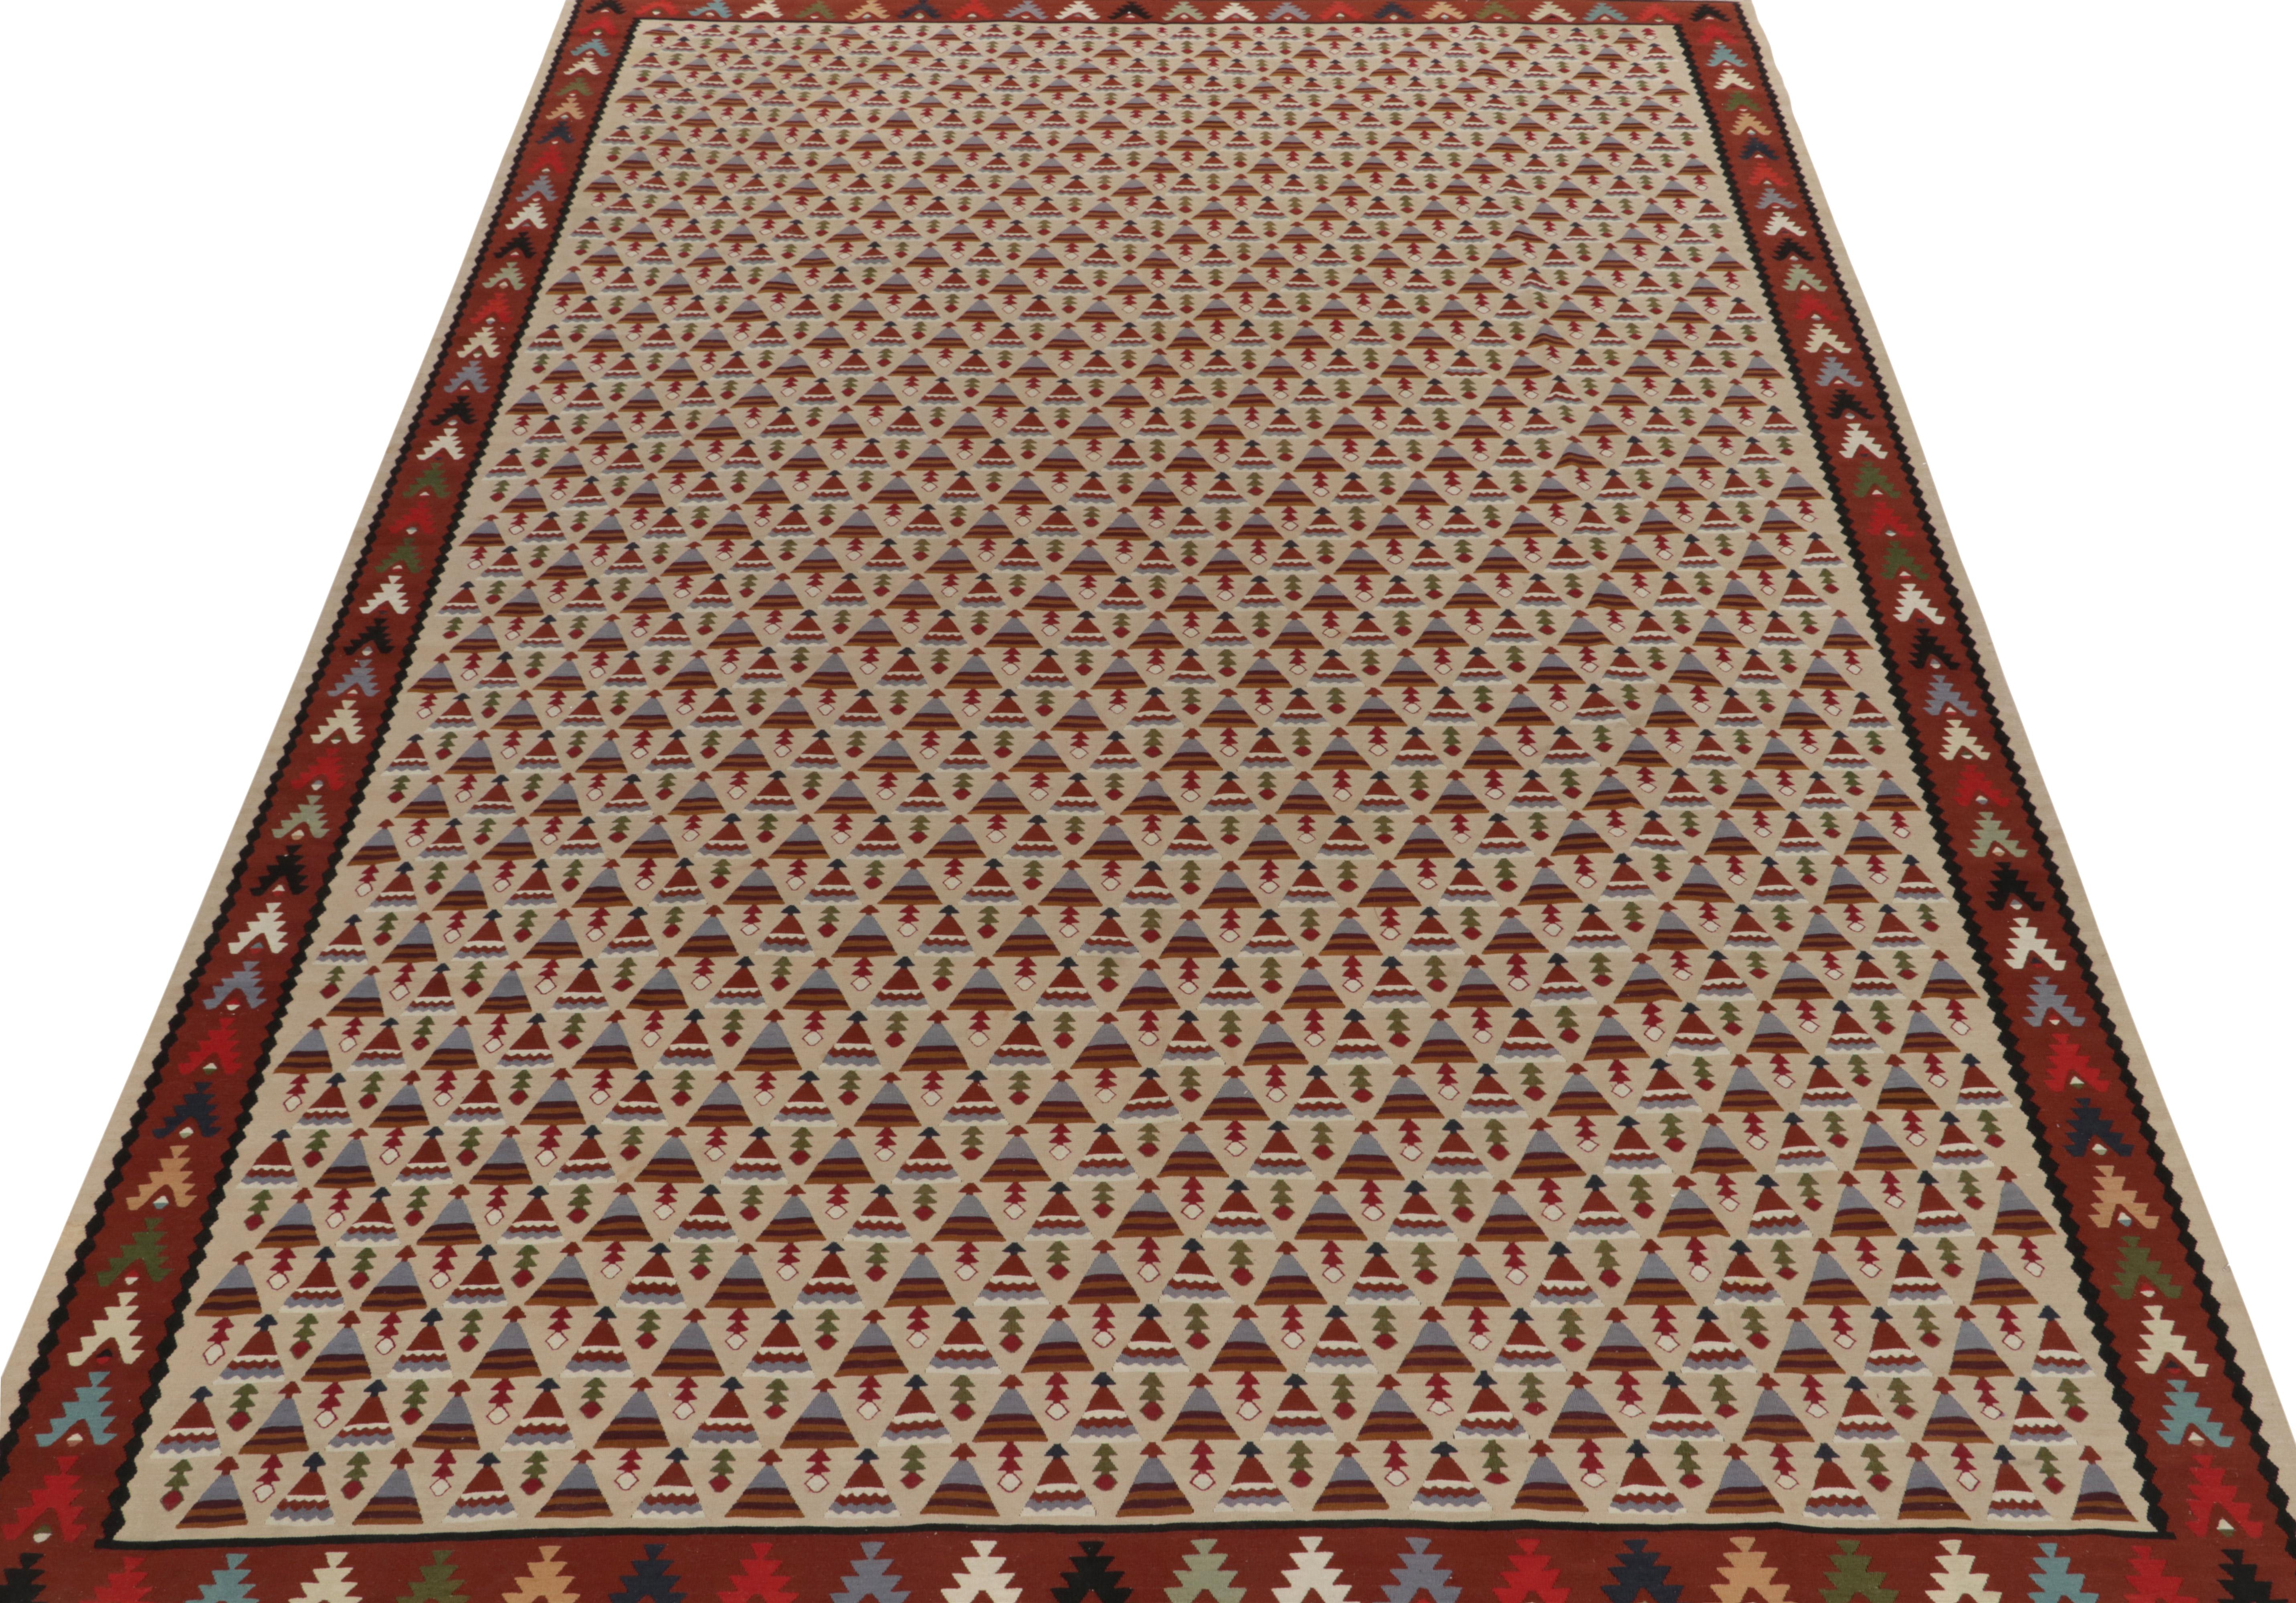 Handwoven in fine wool, a 10x14 antique Kilim rug from believed to be of rare Macedonian origin, circa 1920-1930. 

Exemplifying Folk Art in weaving, the piece reflects a unique sensibility in design with lesser-known motifs adorning field &